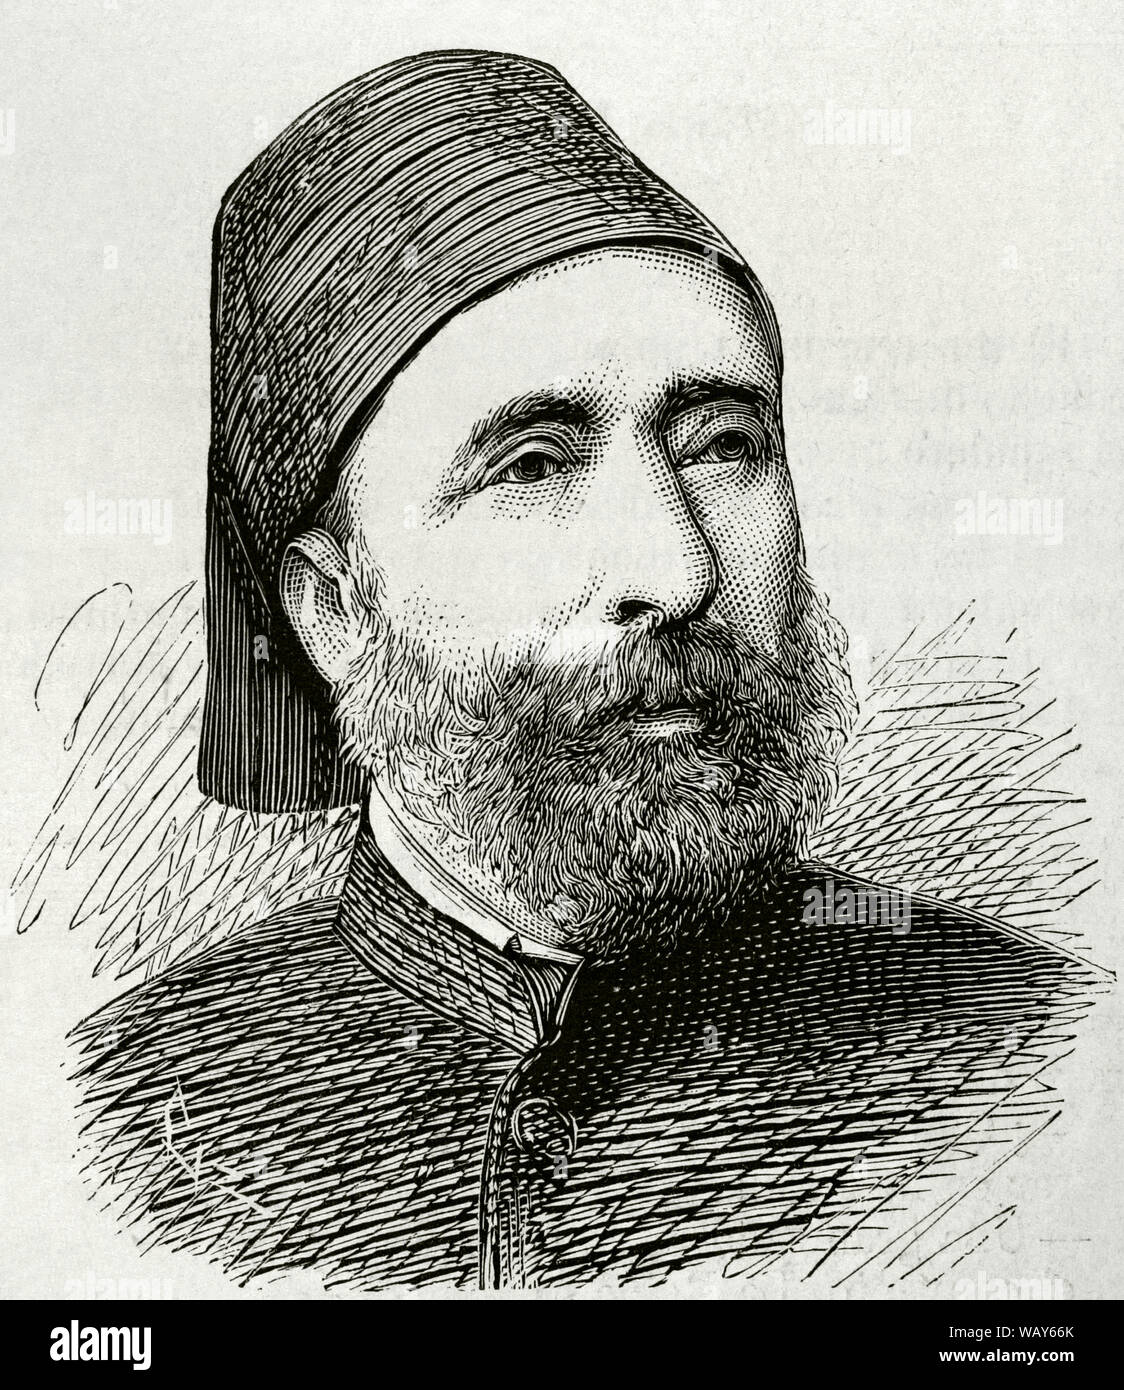 Midhat Pasha or Ahmed Sefik Midhat Pasha (1822-1883). Twice Ottoman grand vizier. He led the Ottoman constitutional movement of 1876 and introducing the First Constitutional Era. Engraving. La Ilustracion Española y Americana, June 30, 1876. Stock Photo